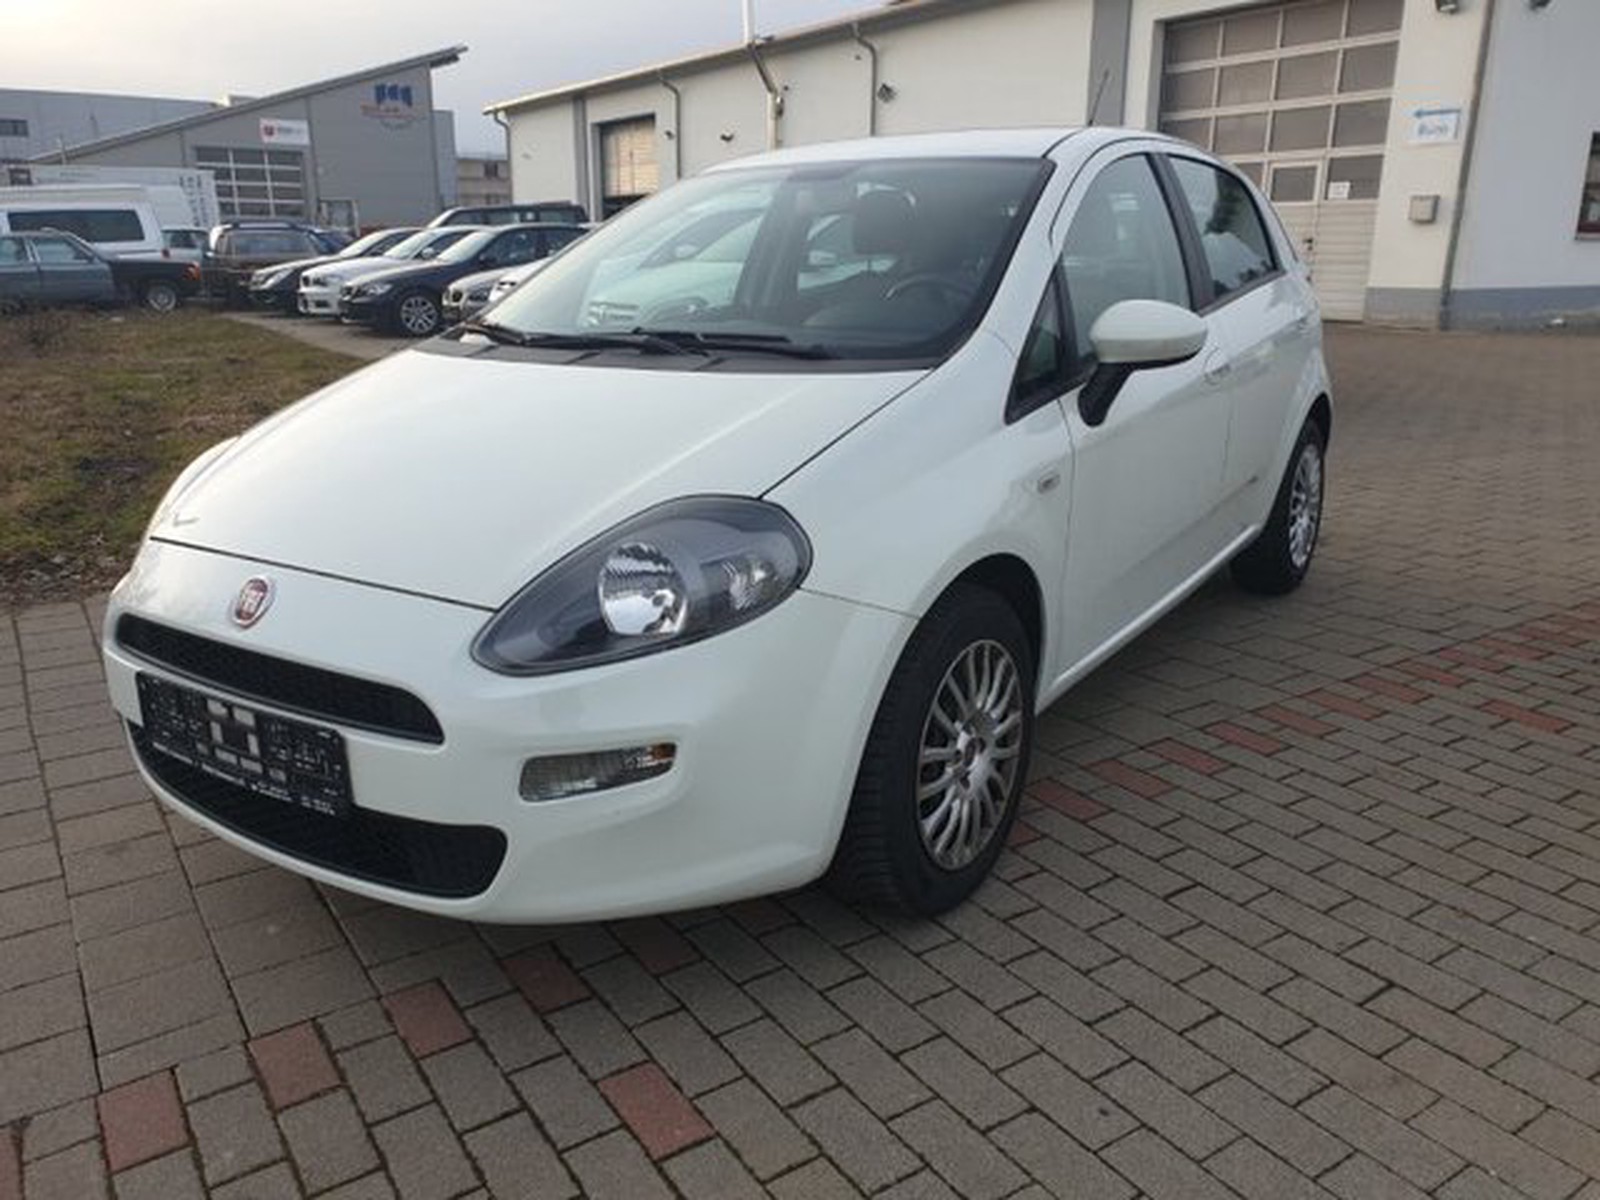 Fiat Punto 1 2 More Tuv Neu Used Buy In Zimmern Ob Rottweil Price 2700 Eur Int Nr 9 Sold